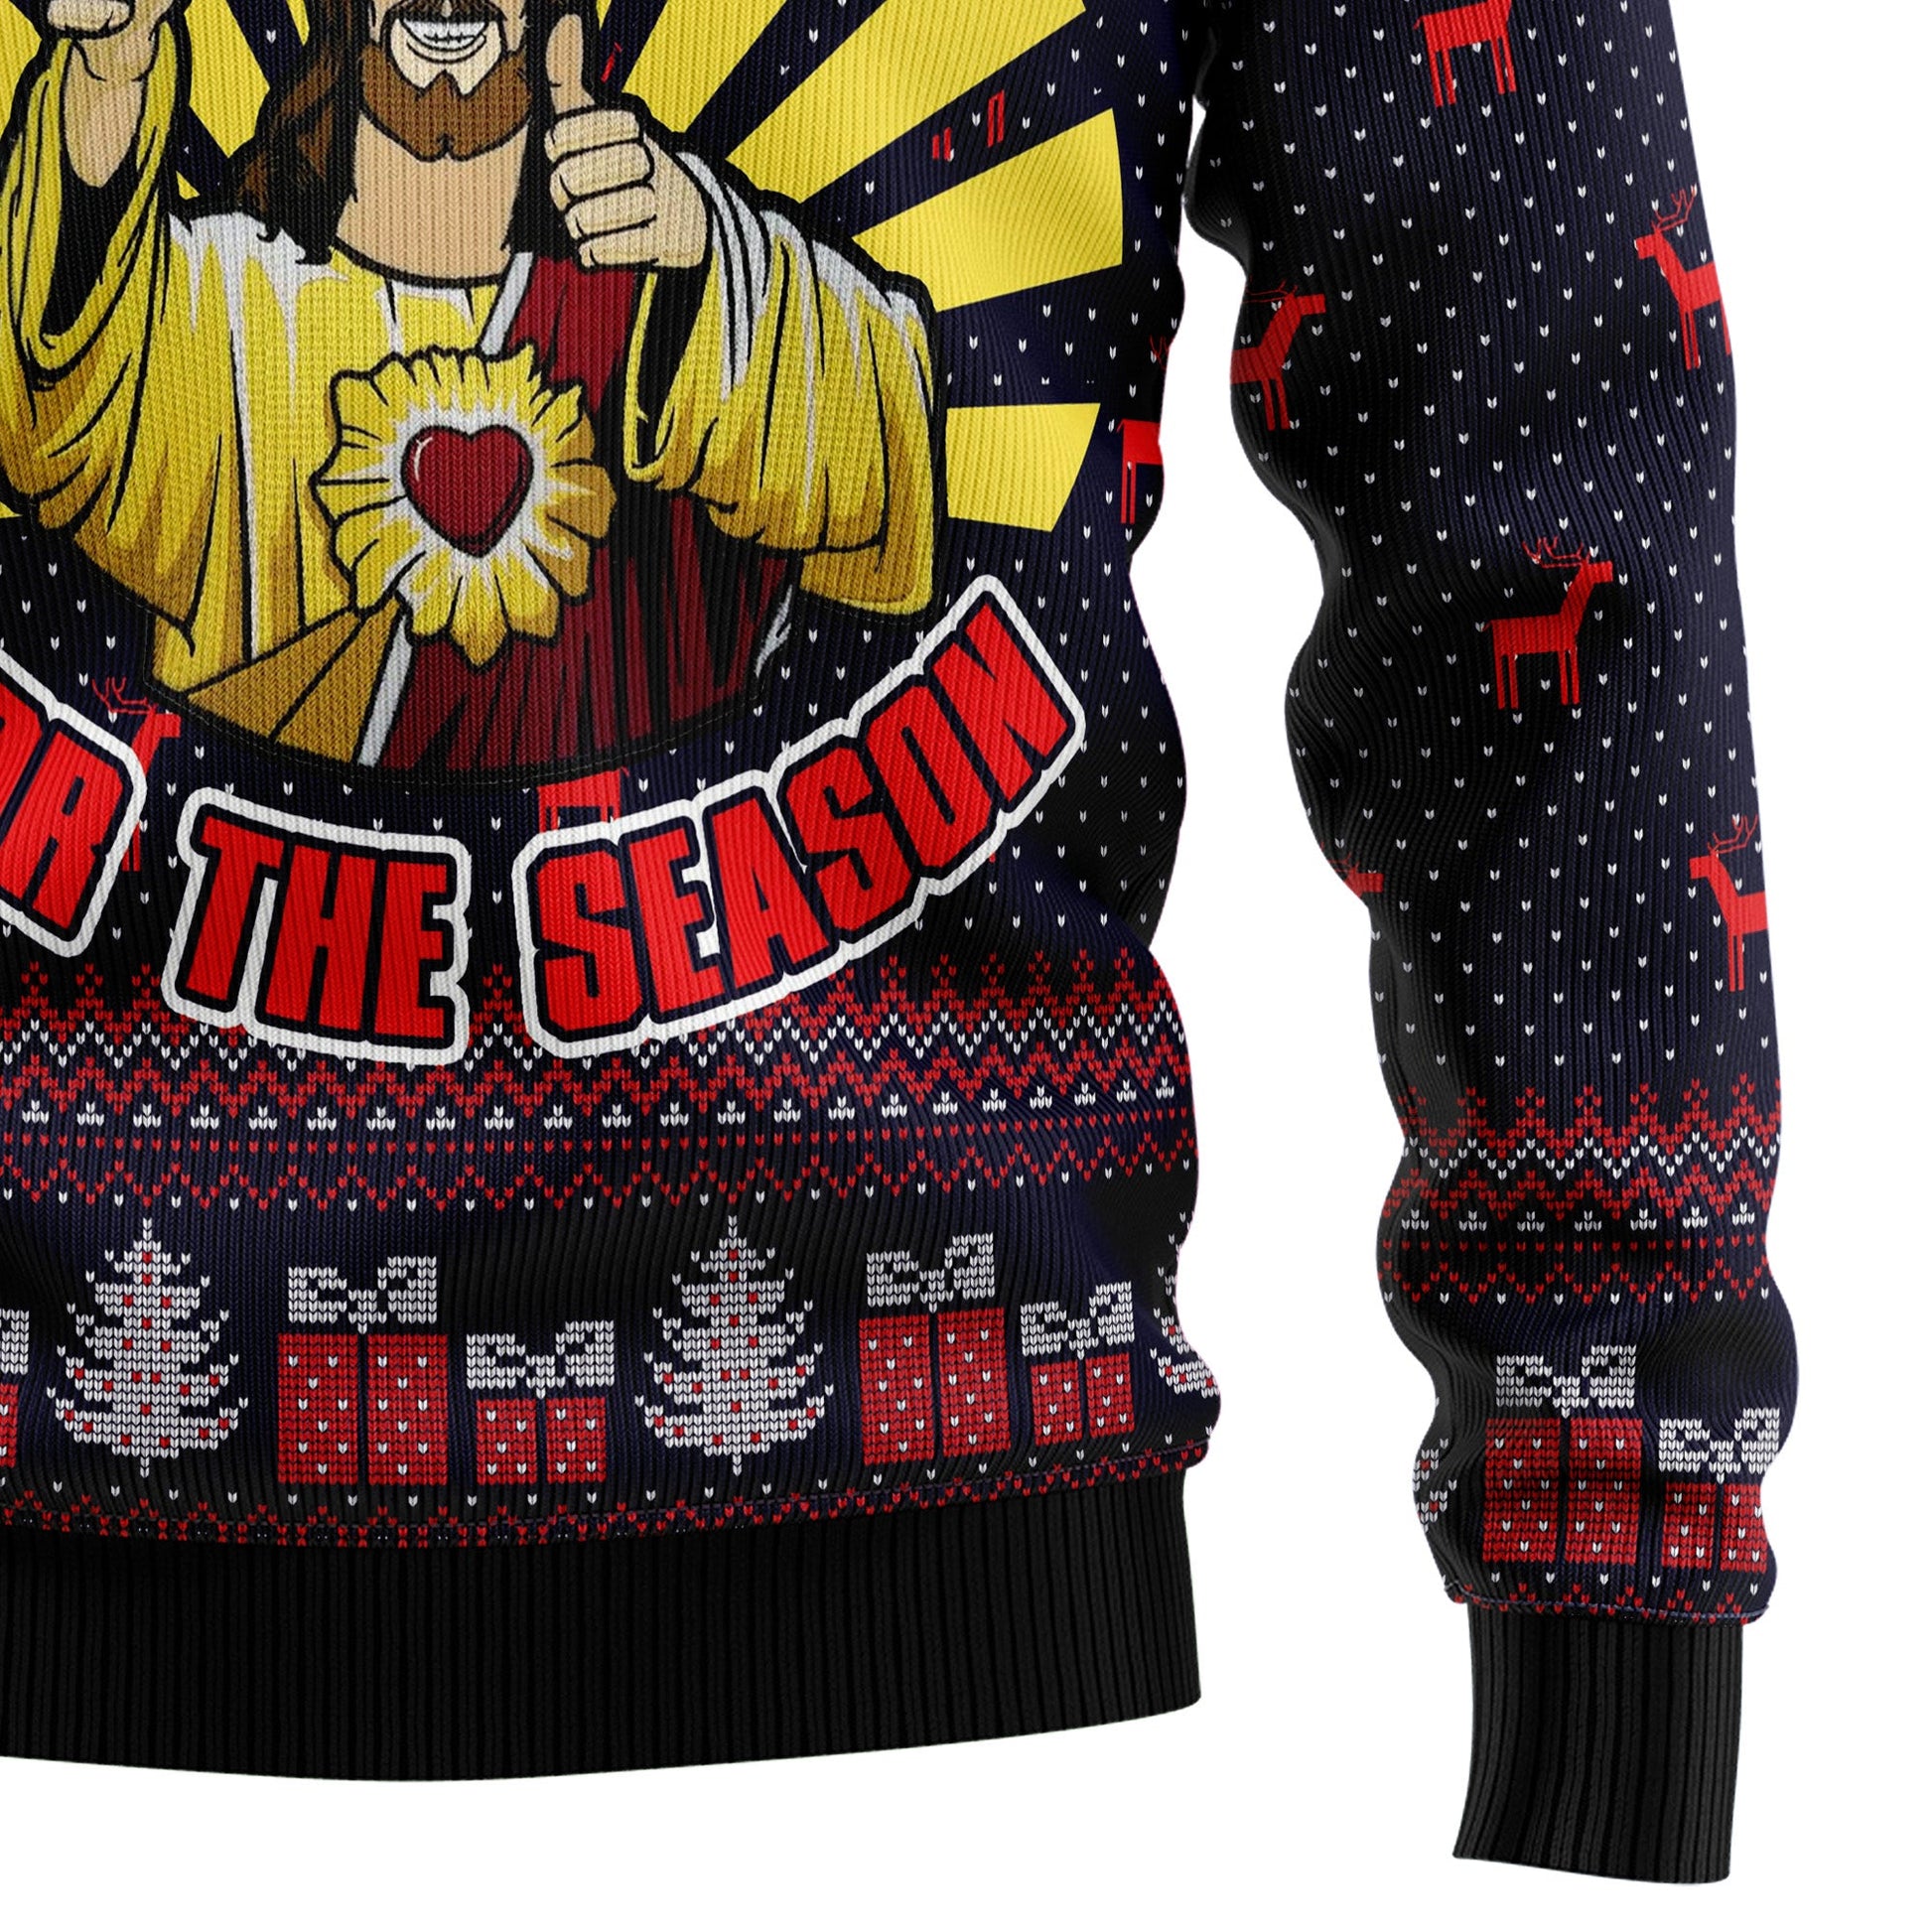 Jesus Is The Reason For The Season Funny Ugly Christmas Sweater - Xmas Gifts For Him Or Her - Jesus Christ Sweater - Christian Shirts Gifts Idea